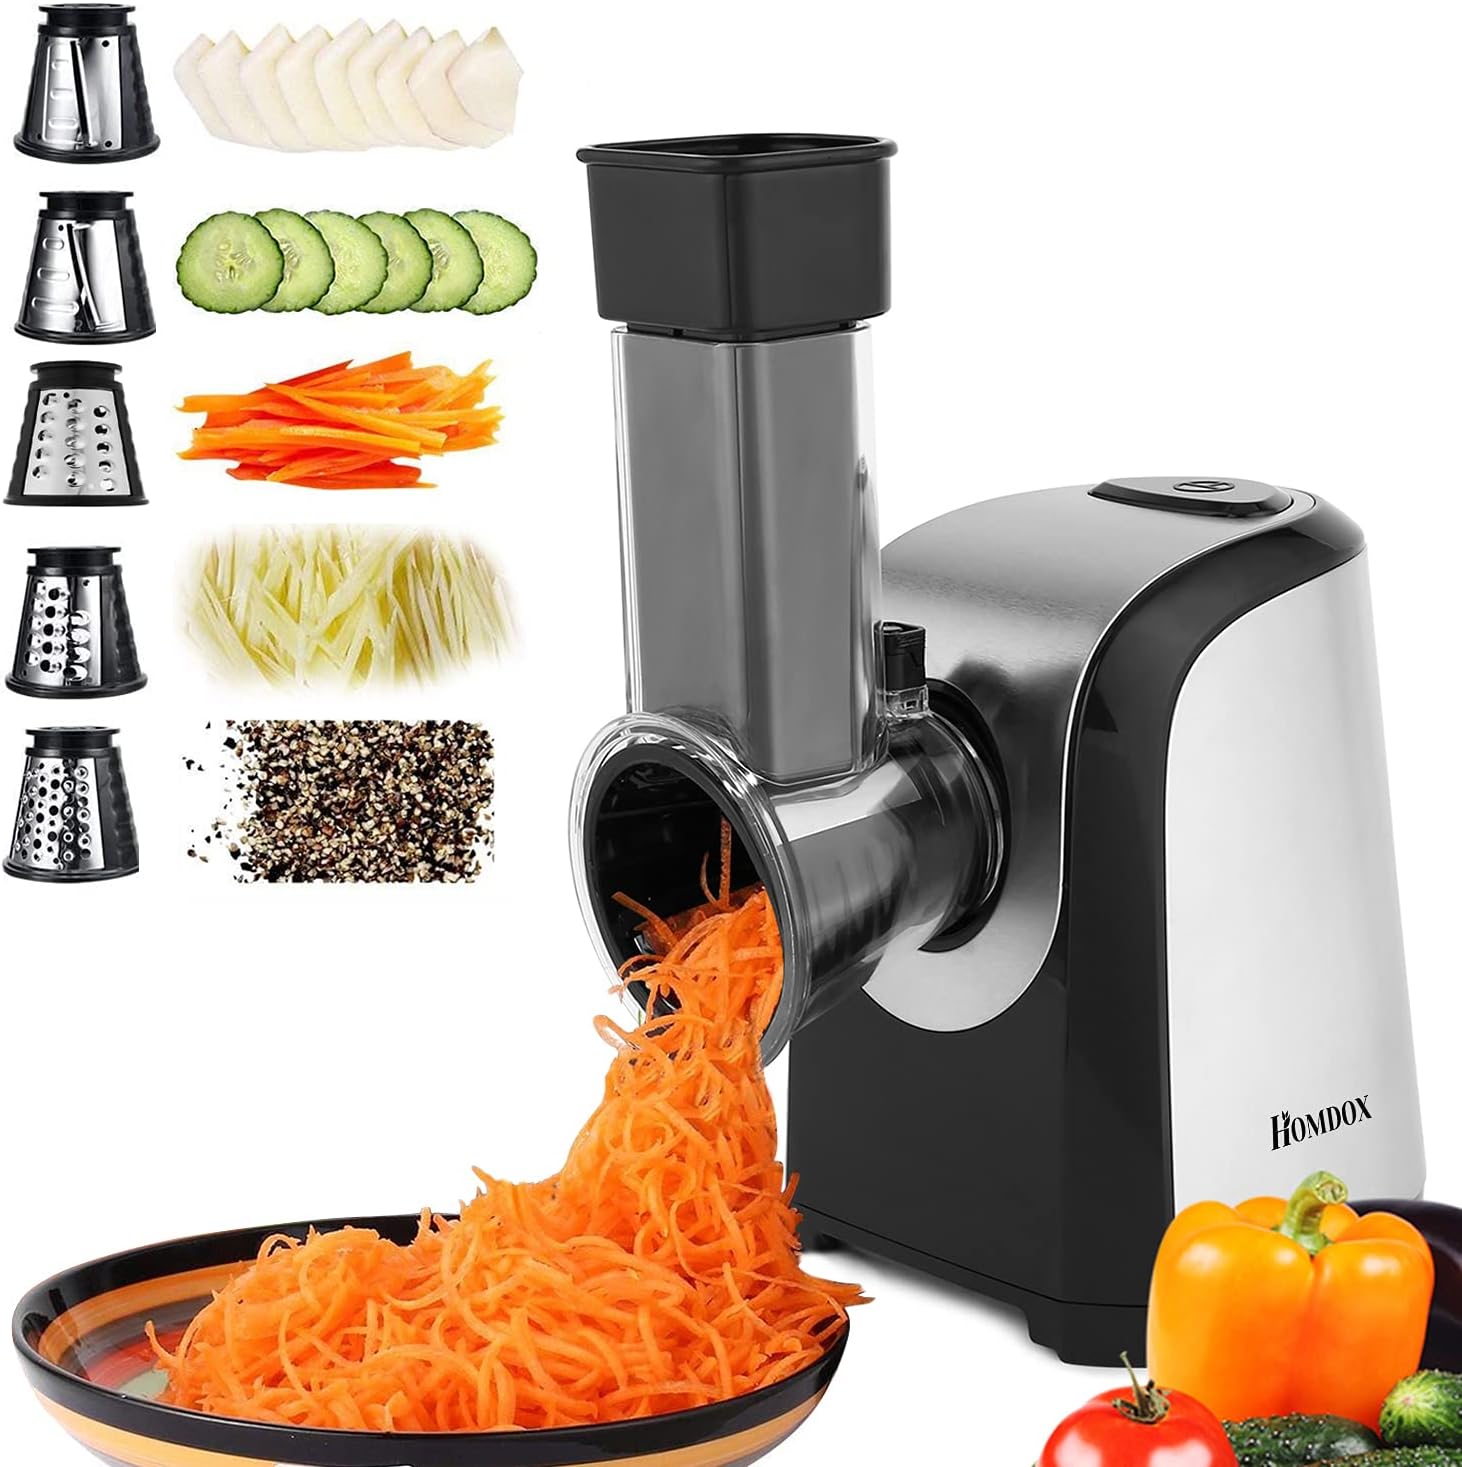 Homdox BK002 5 In 1 Professional Cheese Grater Electric, Electric